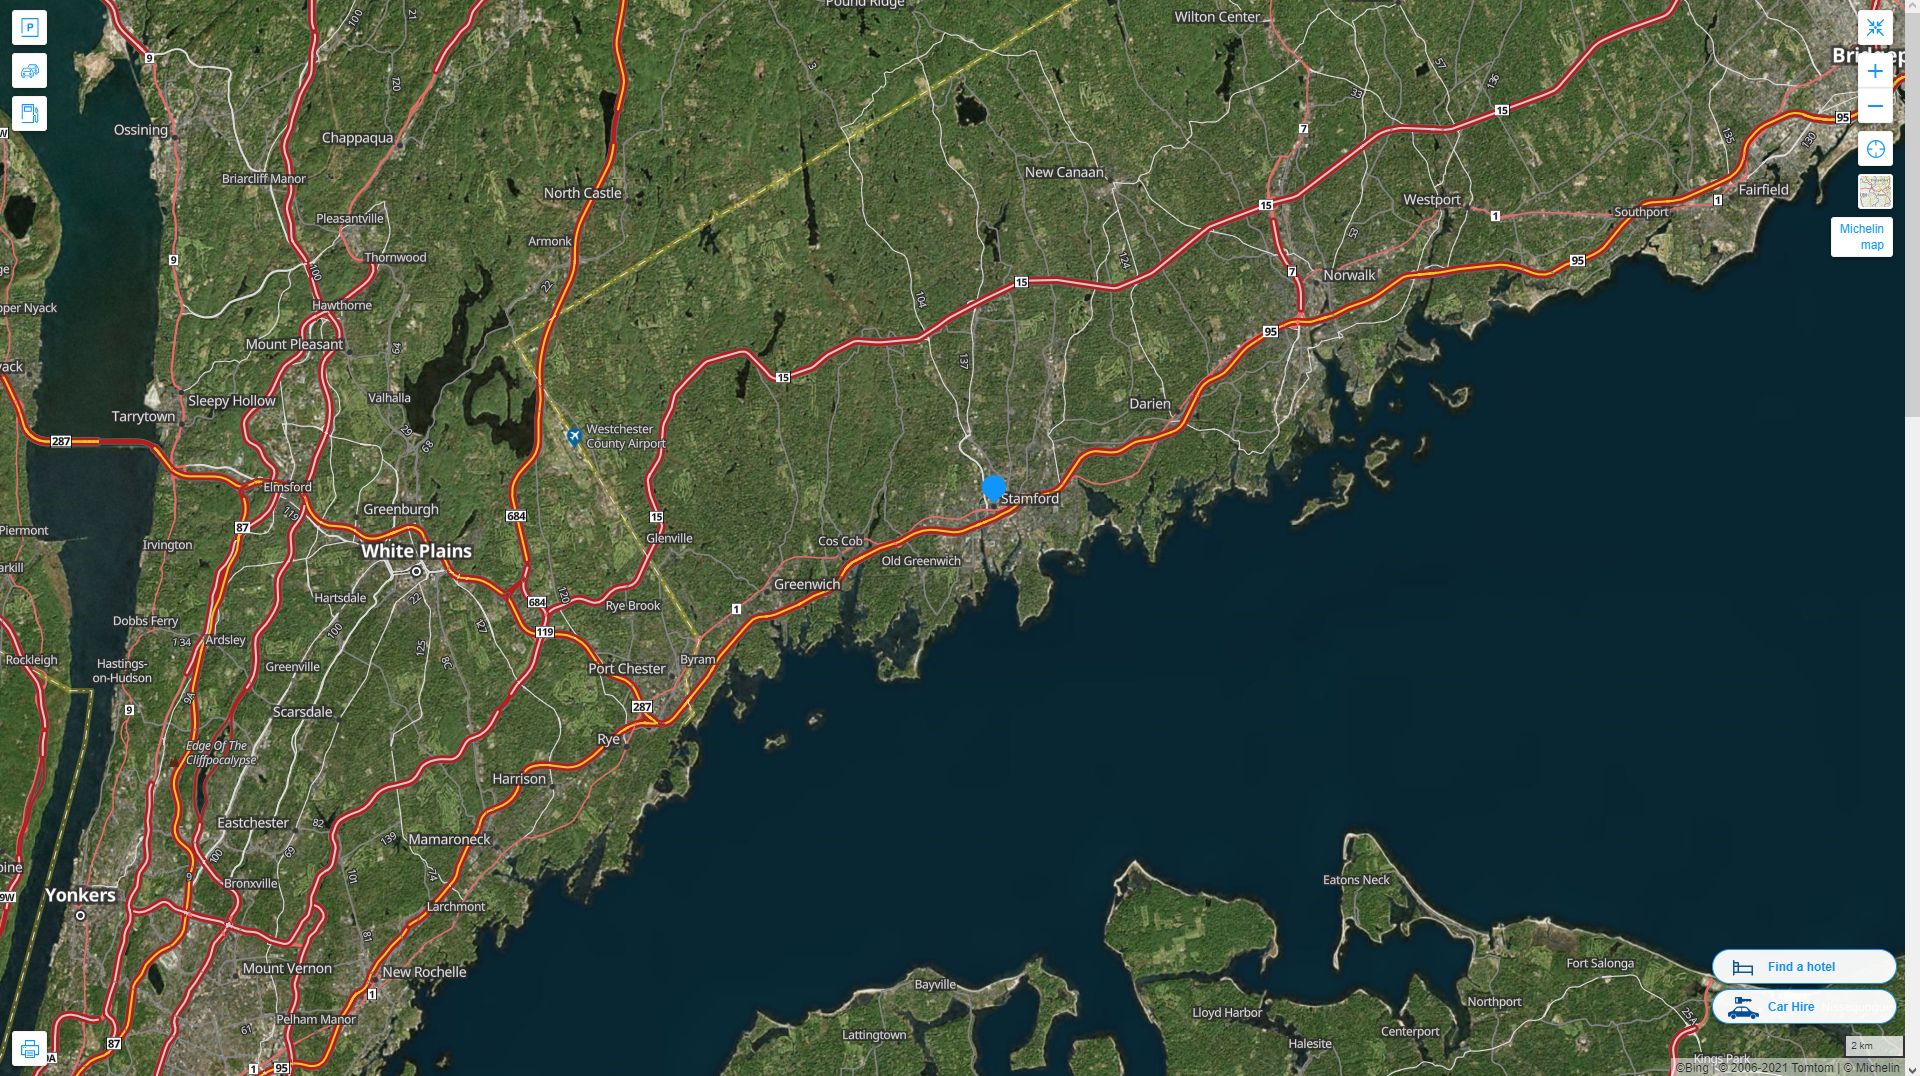 Stamford Connecticut Highway and Road Map with Satellite View